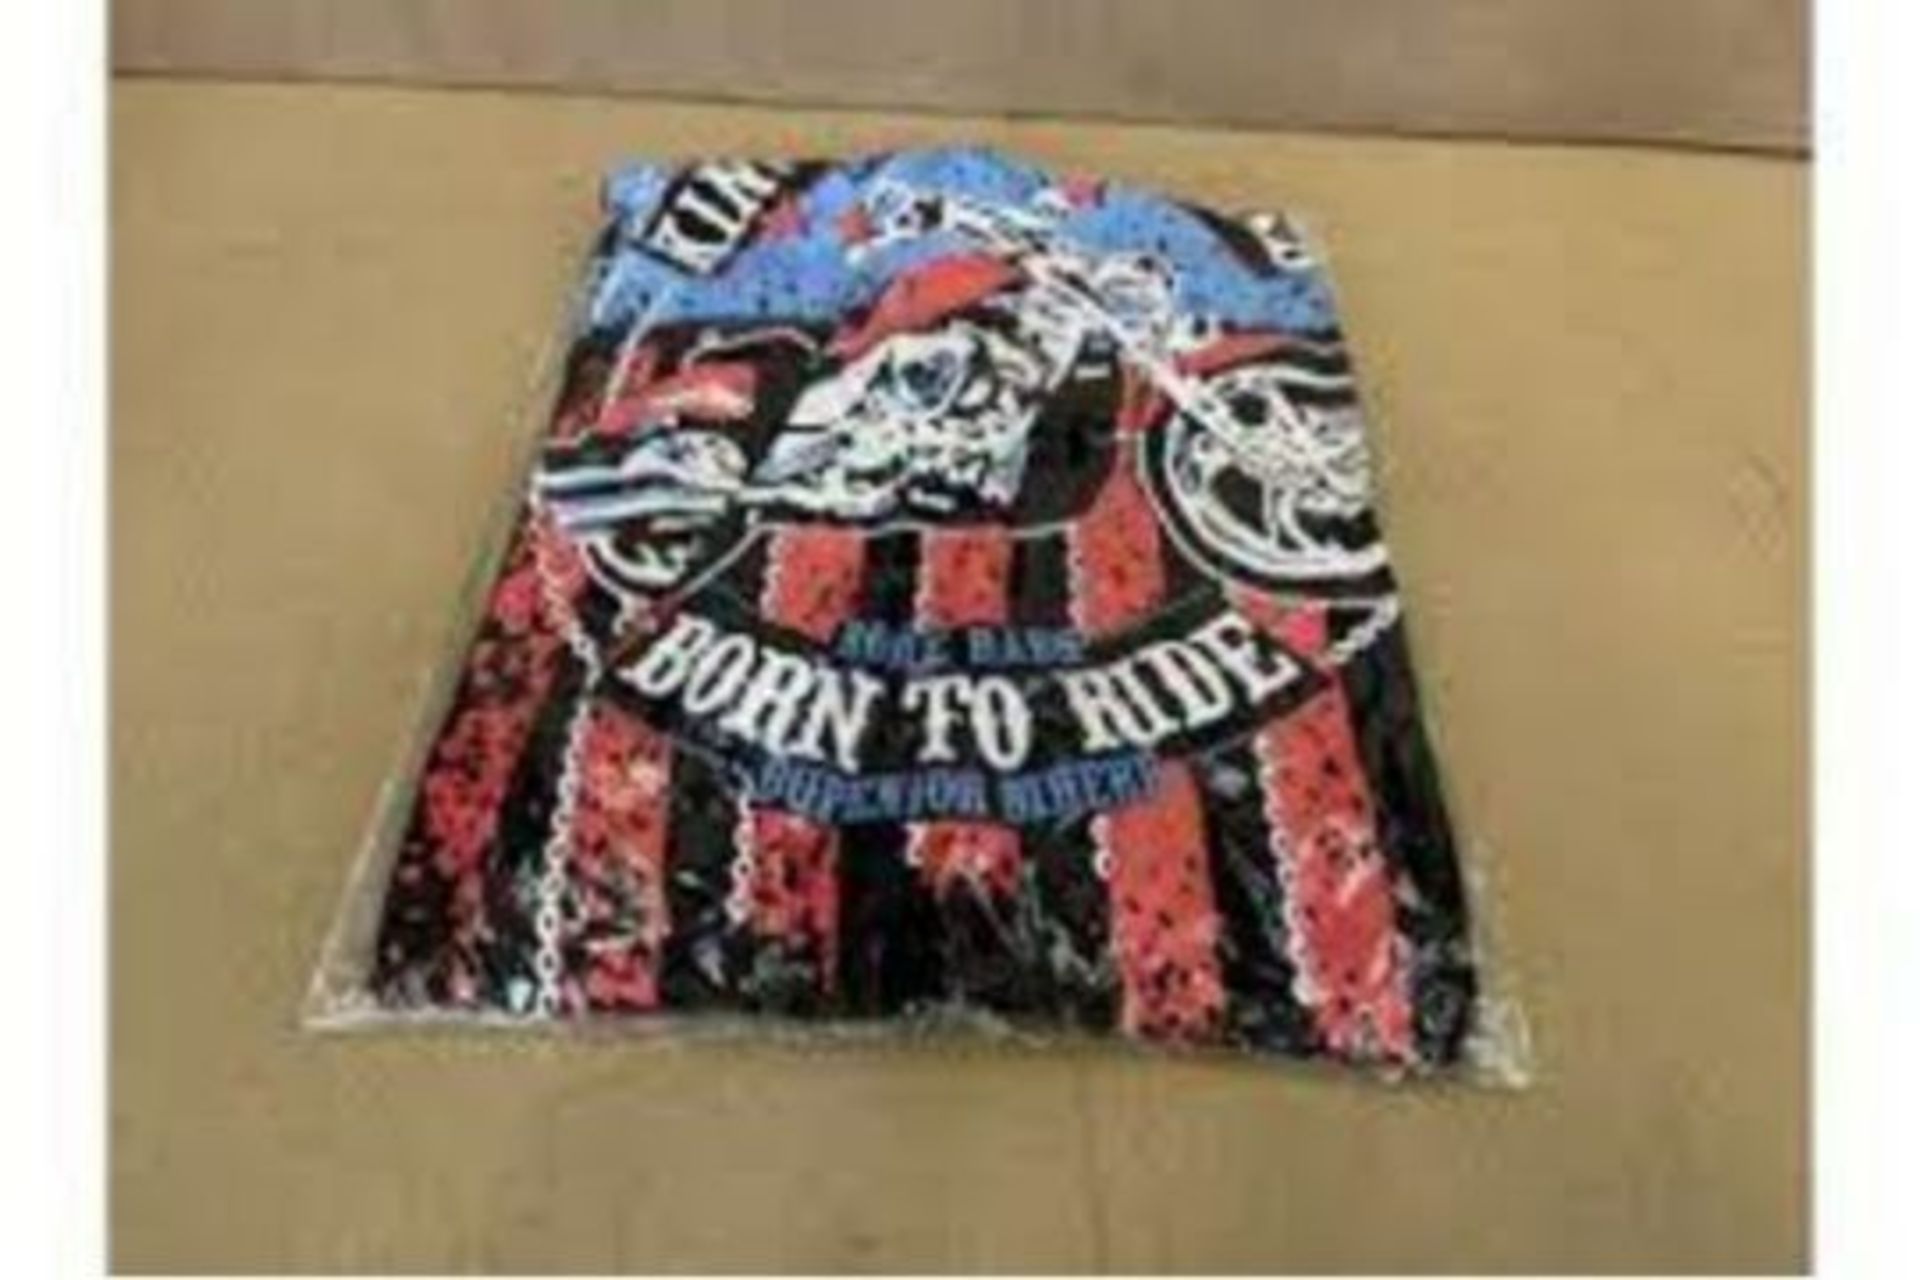 25 X BRAND NEW BORN TO RIDE ROCK DRESSES IN VARIOUS SIZES S1P - Image 2 of 2